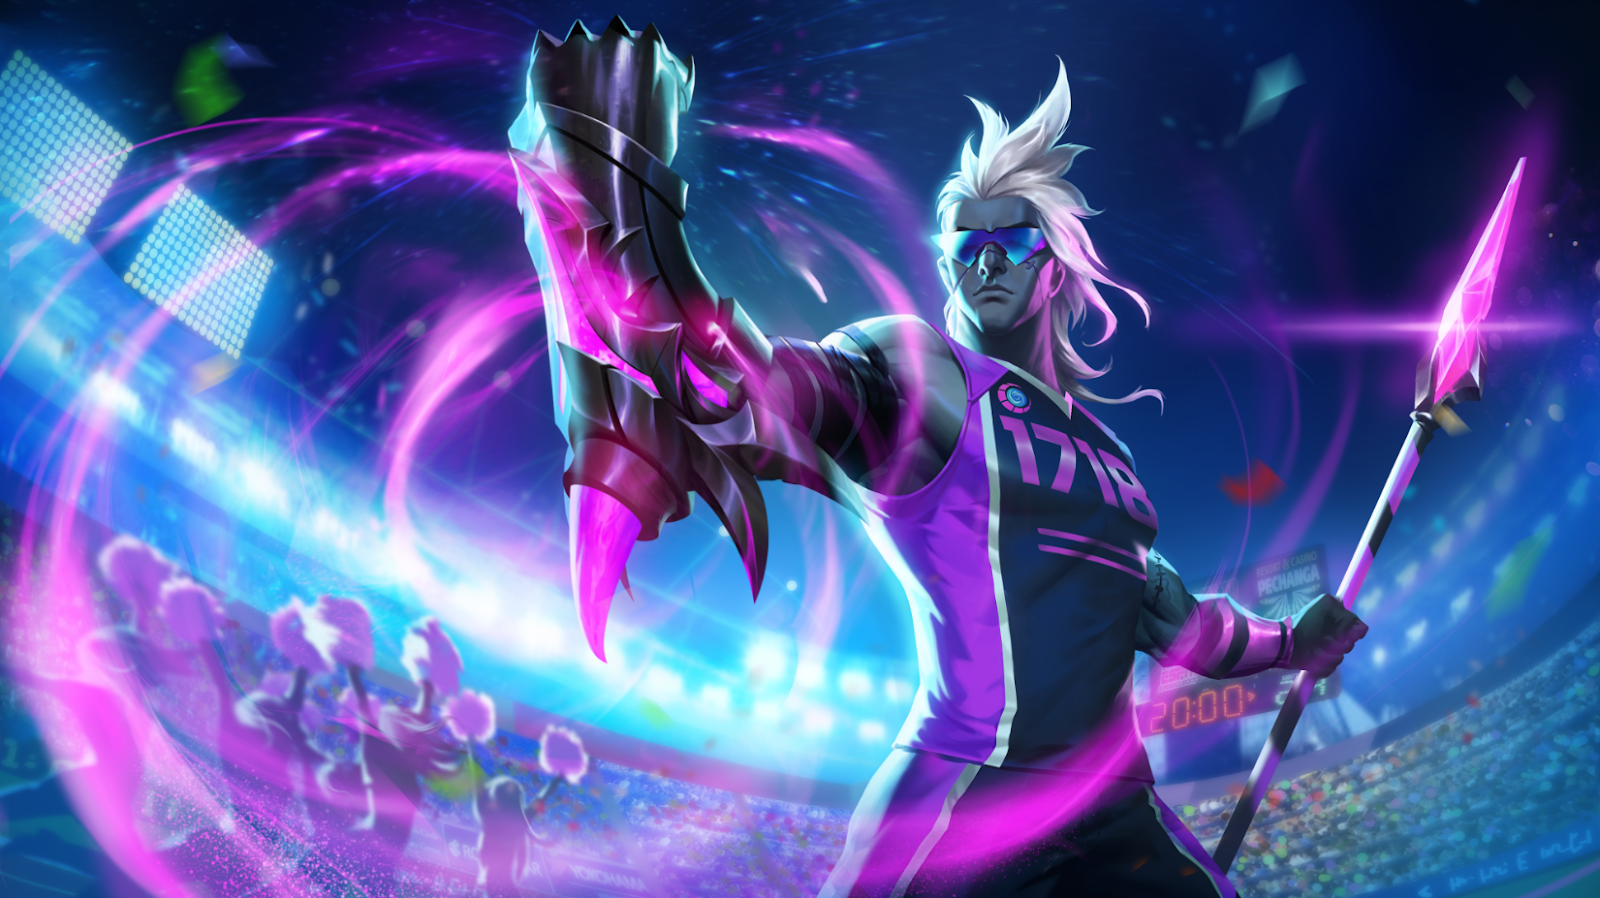 Epic Phone Pngs Hd - Mobile Legends Moskov Javelin Champion , HD Wallpaper & Backgrounds